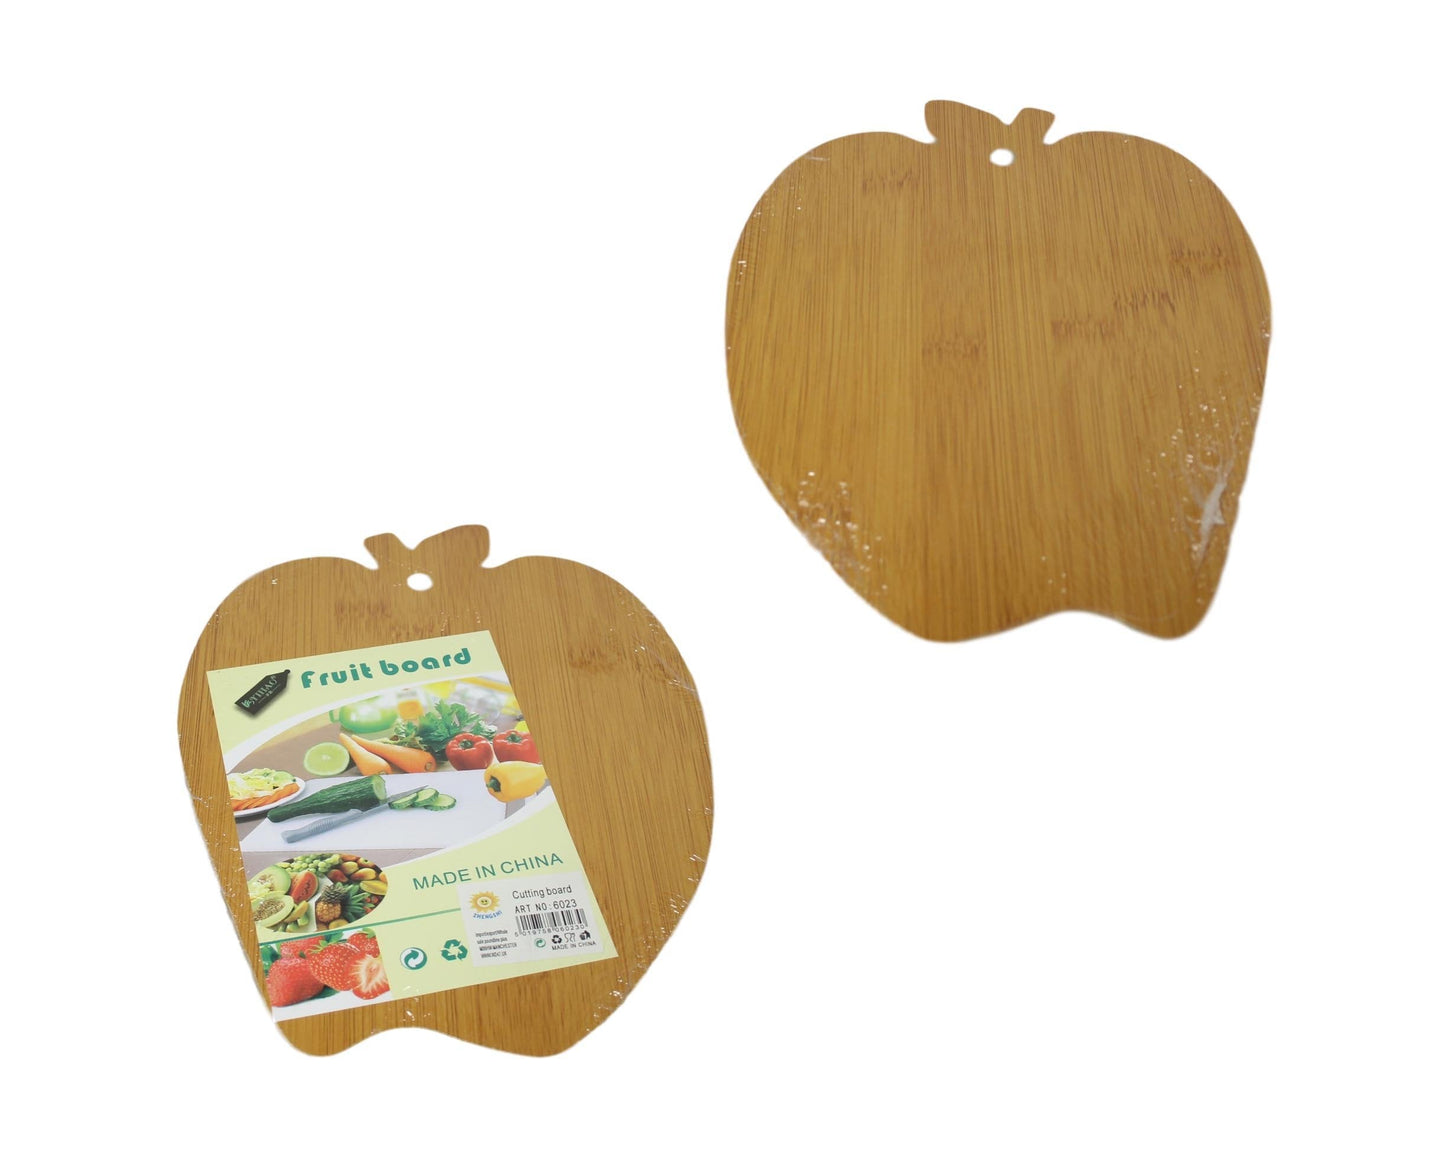 Wooden Kitchen Prep Food Fruit Cutting Board Apple Shaped 22cm x 17cm 6023 (Large Letter Rate)